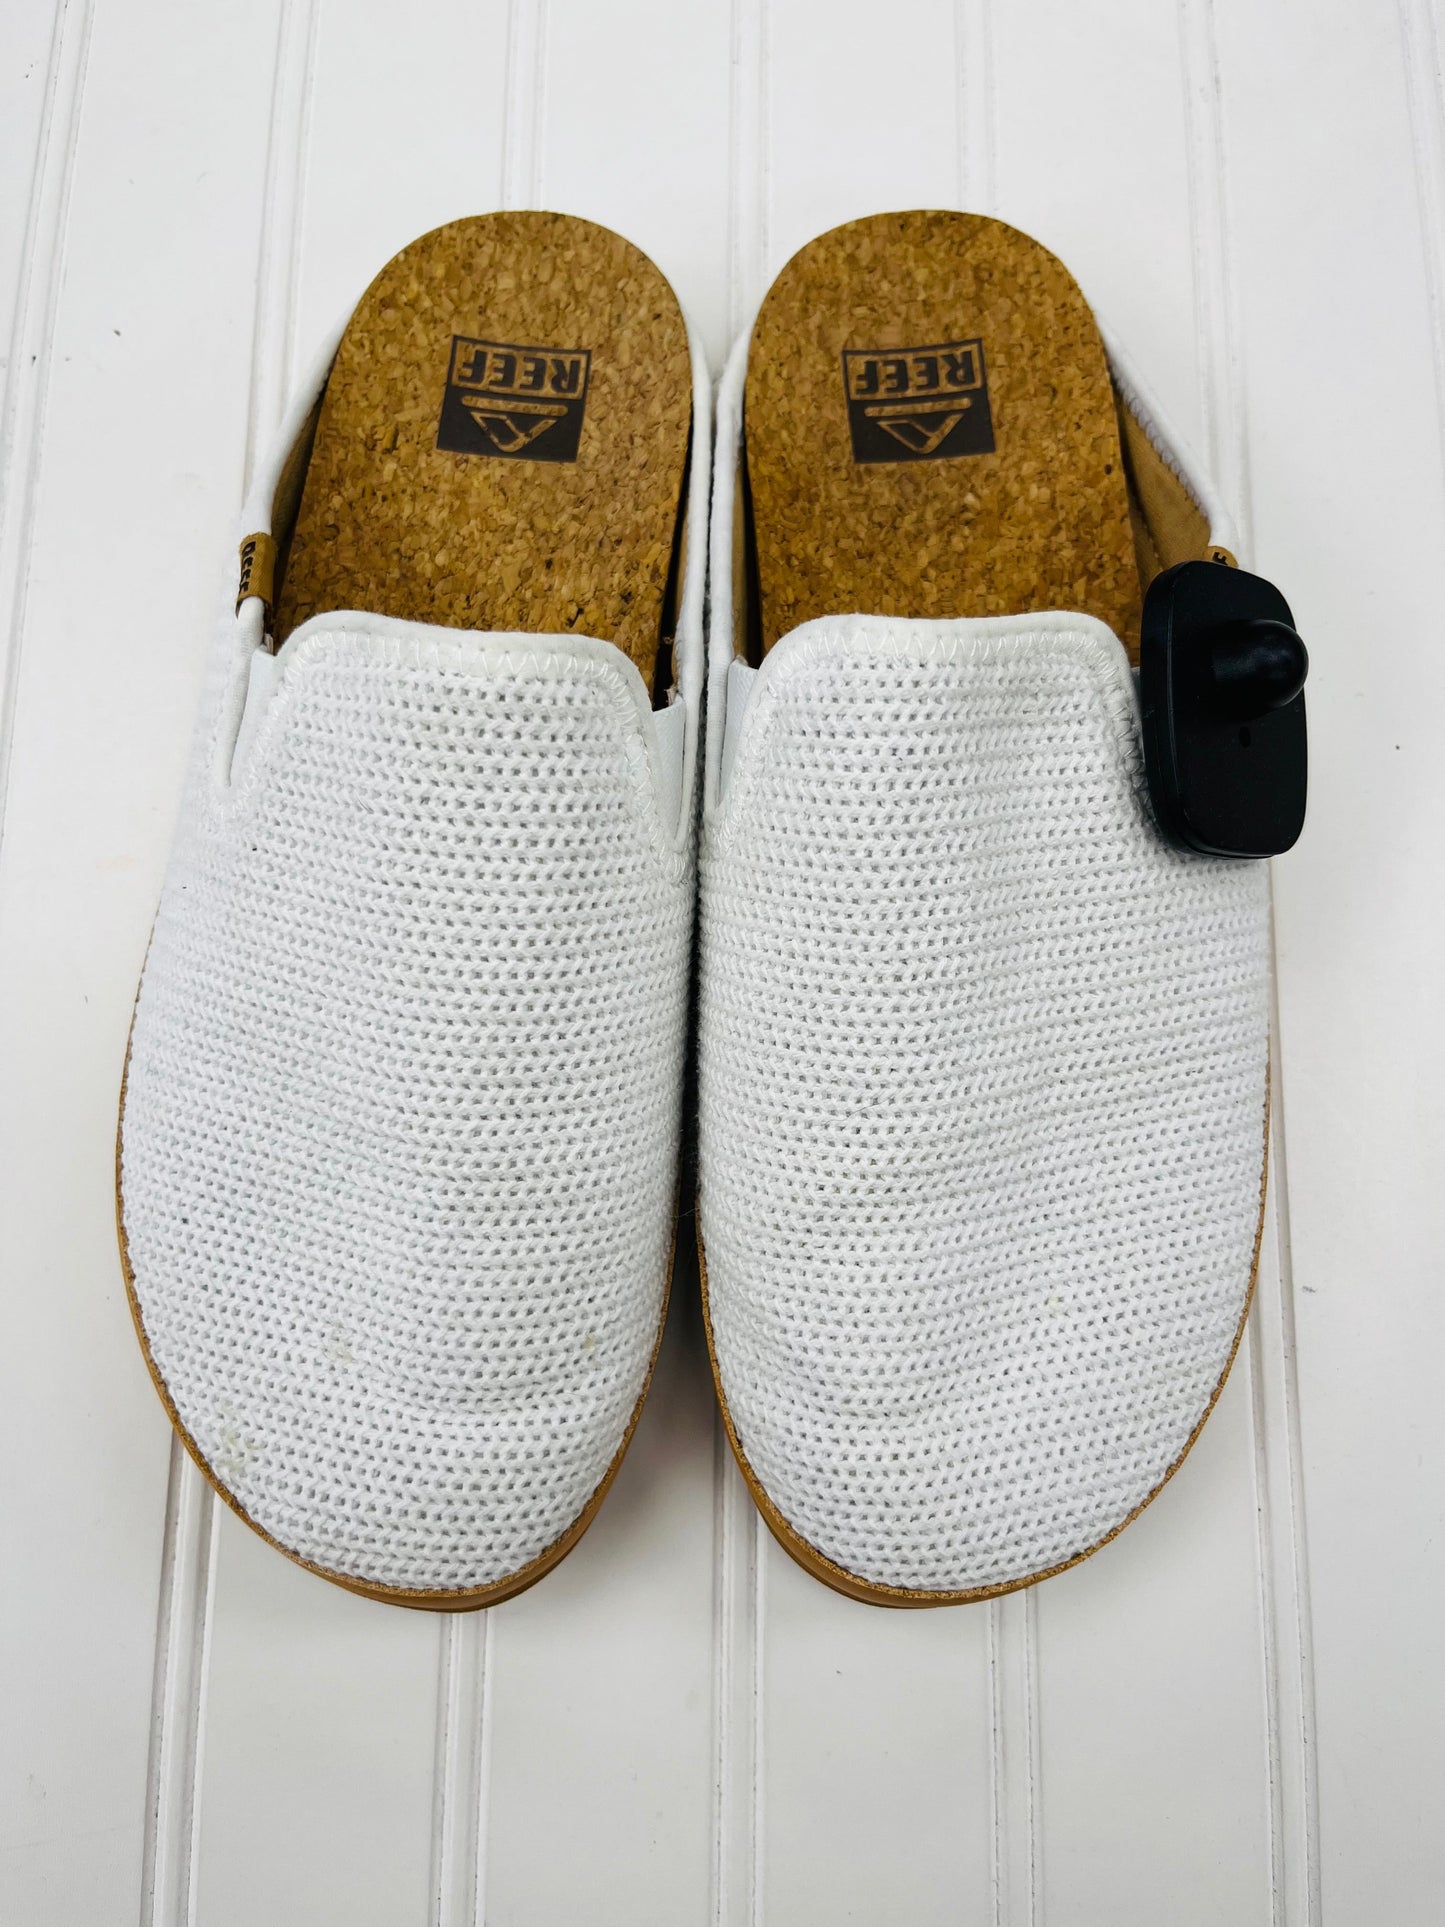 White Shoes Flats Reef, Size 8